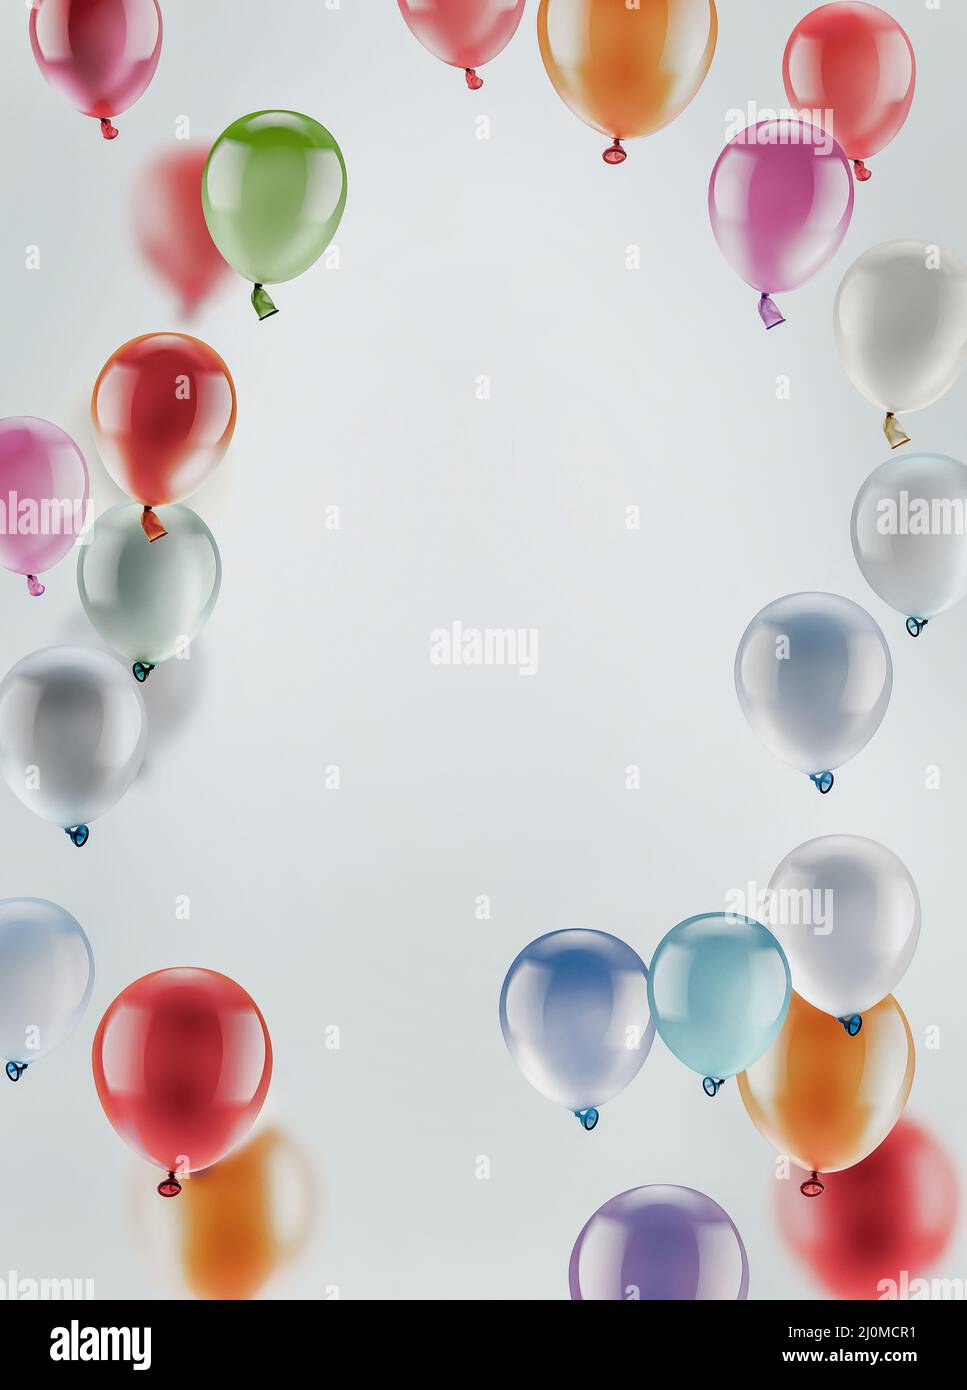 Festive Background with Balloons Stock Photo